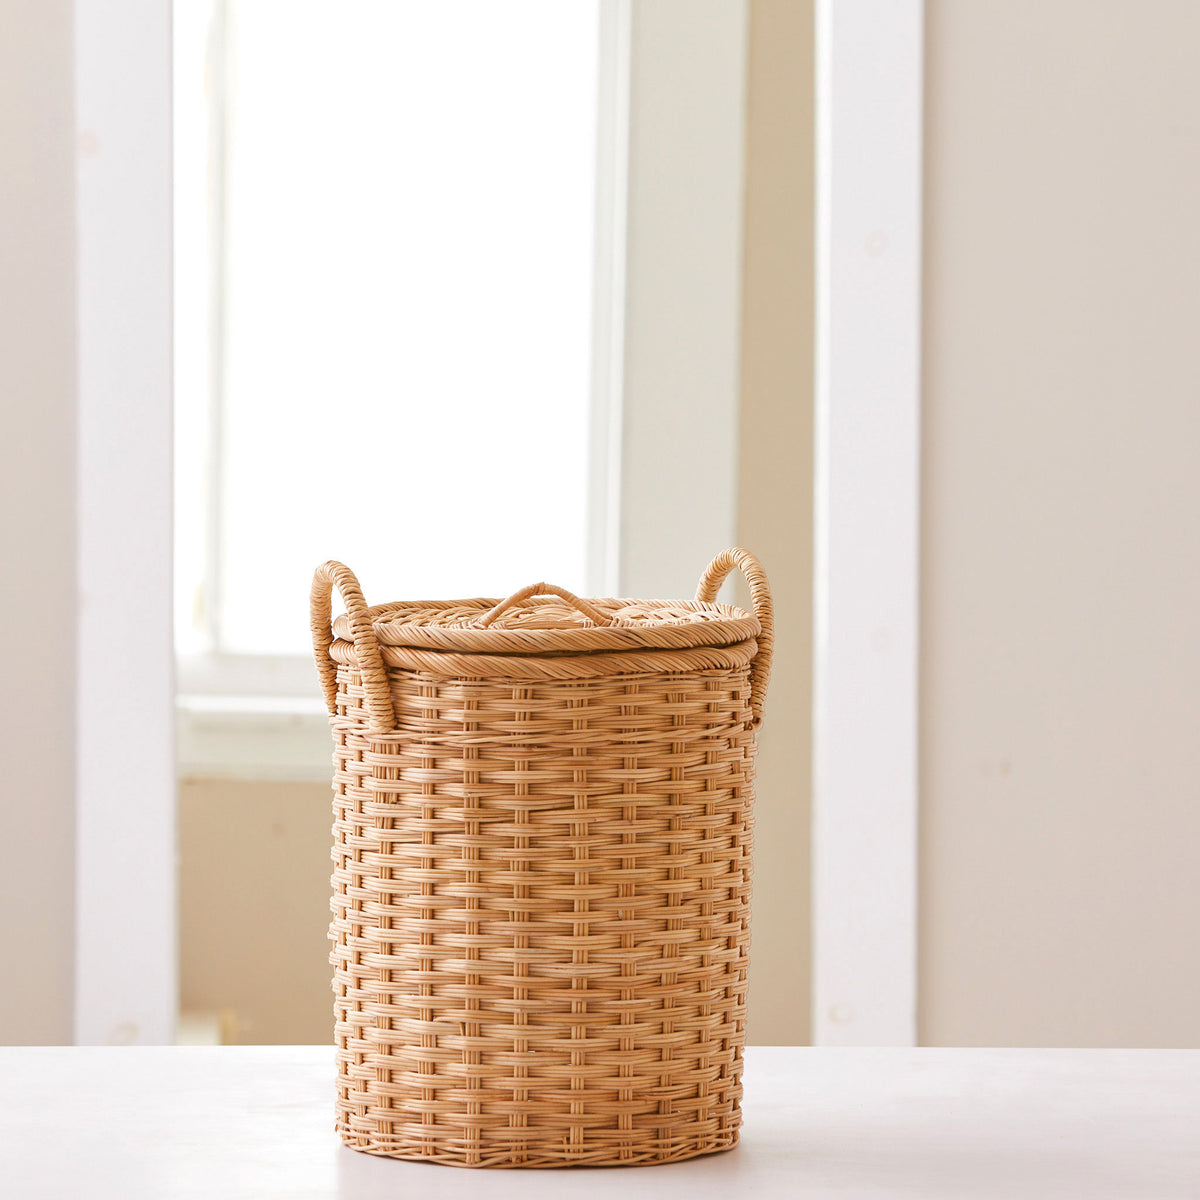 Round rattan storage basket. Unique storage baskets with lids and handles. 5 sizes. Extra Small shown. Great basket for storage. XL, L, M, S, XS.